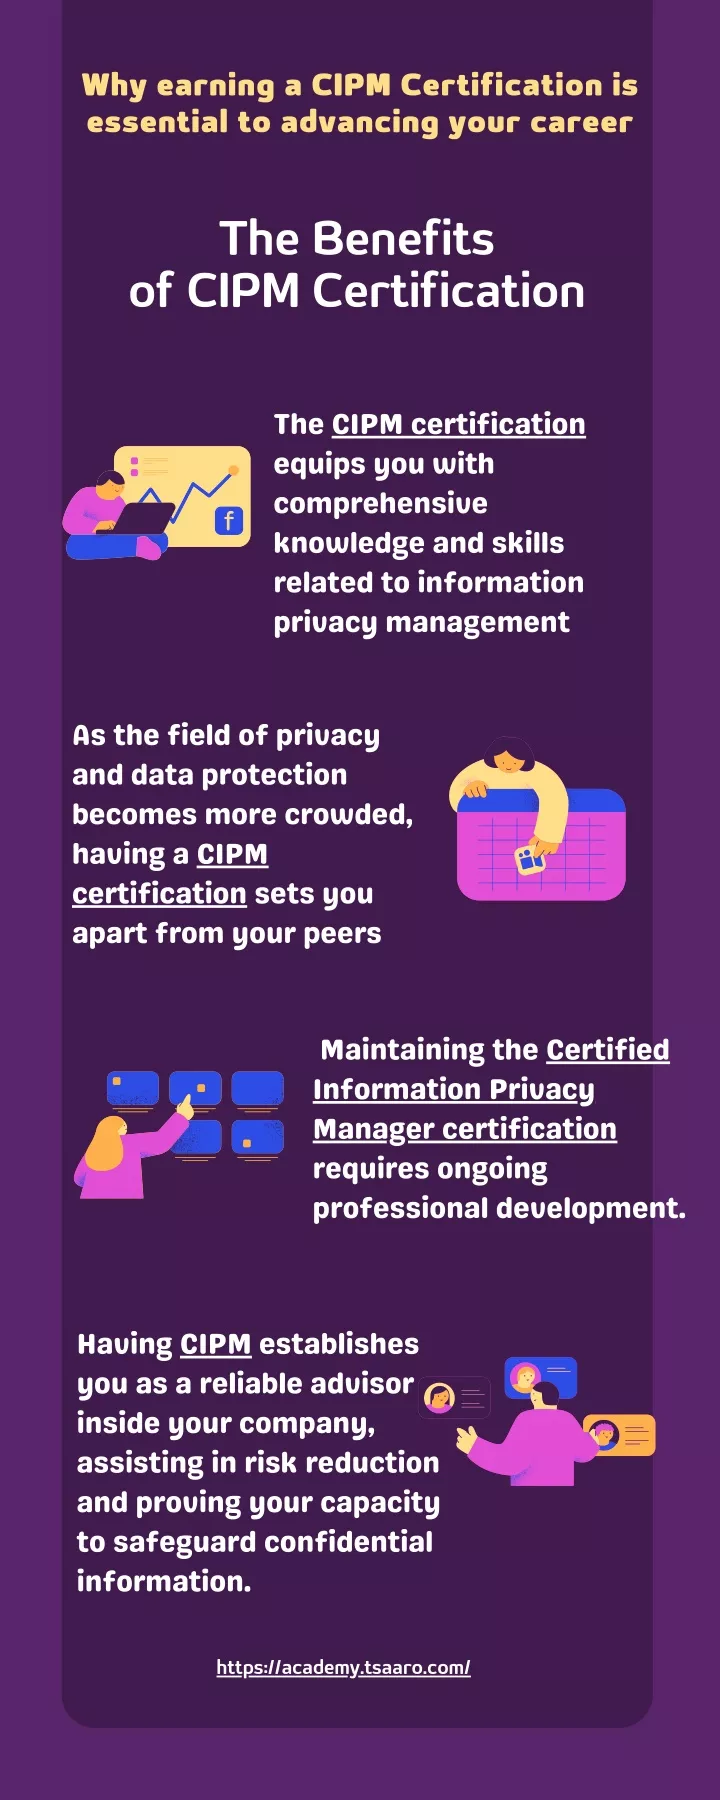 PPT Why earning a CIPM Certification is essential to advancing your